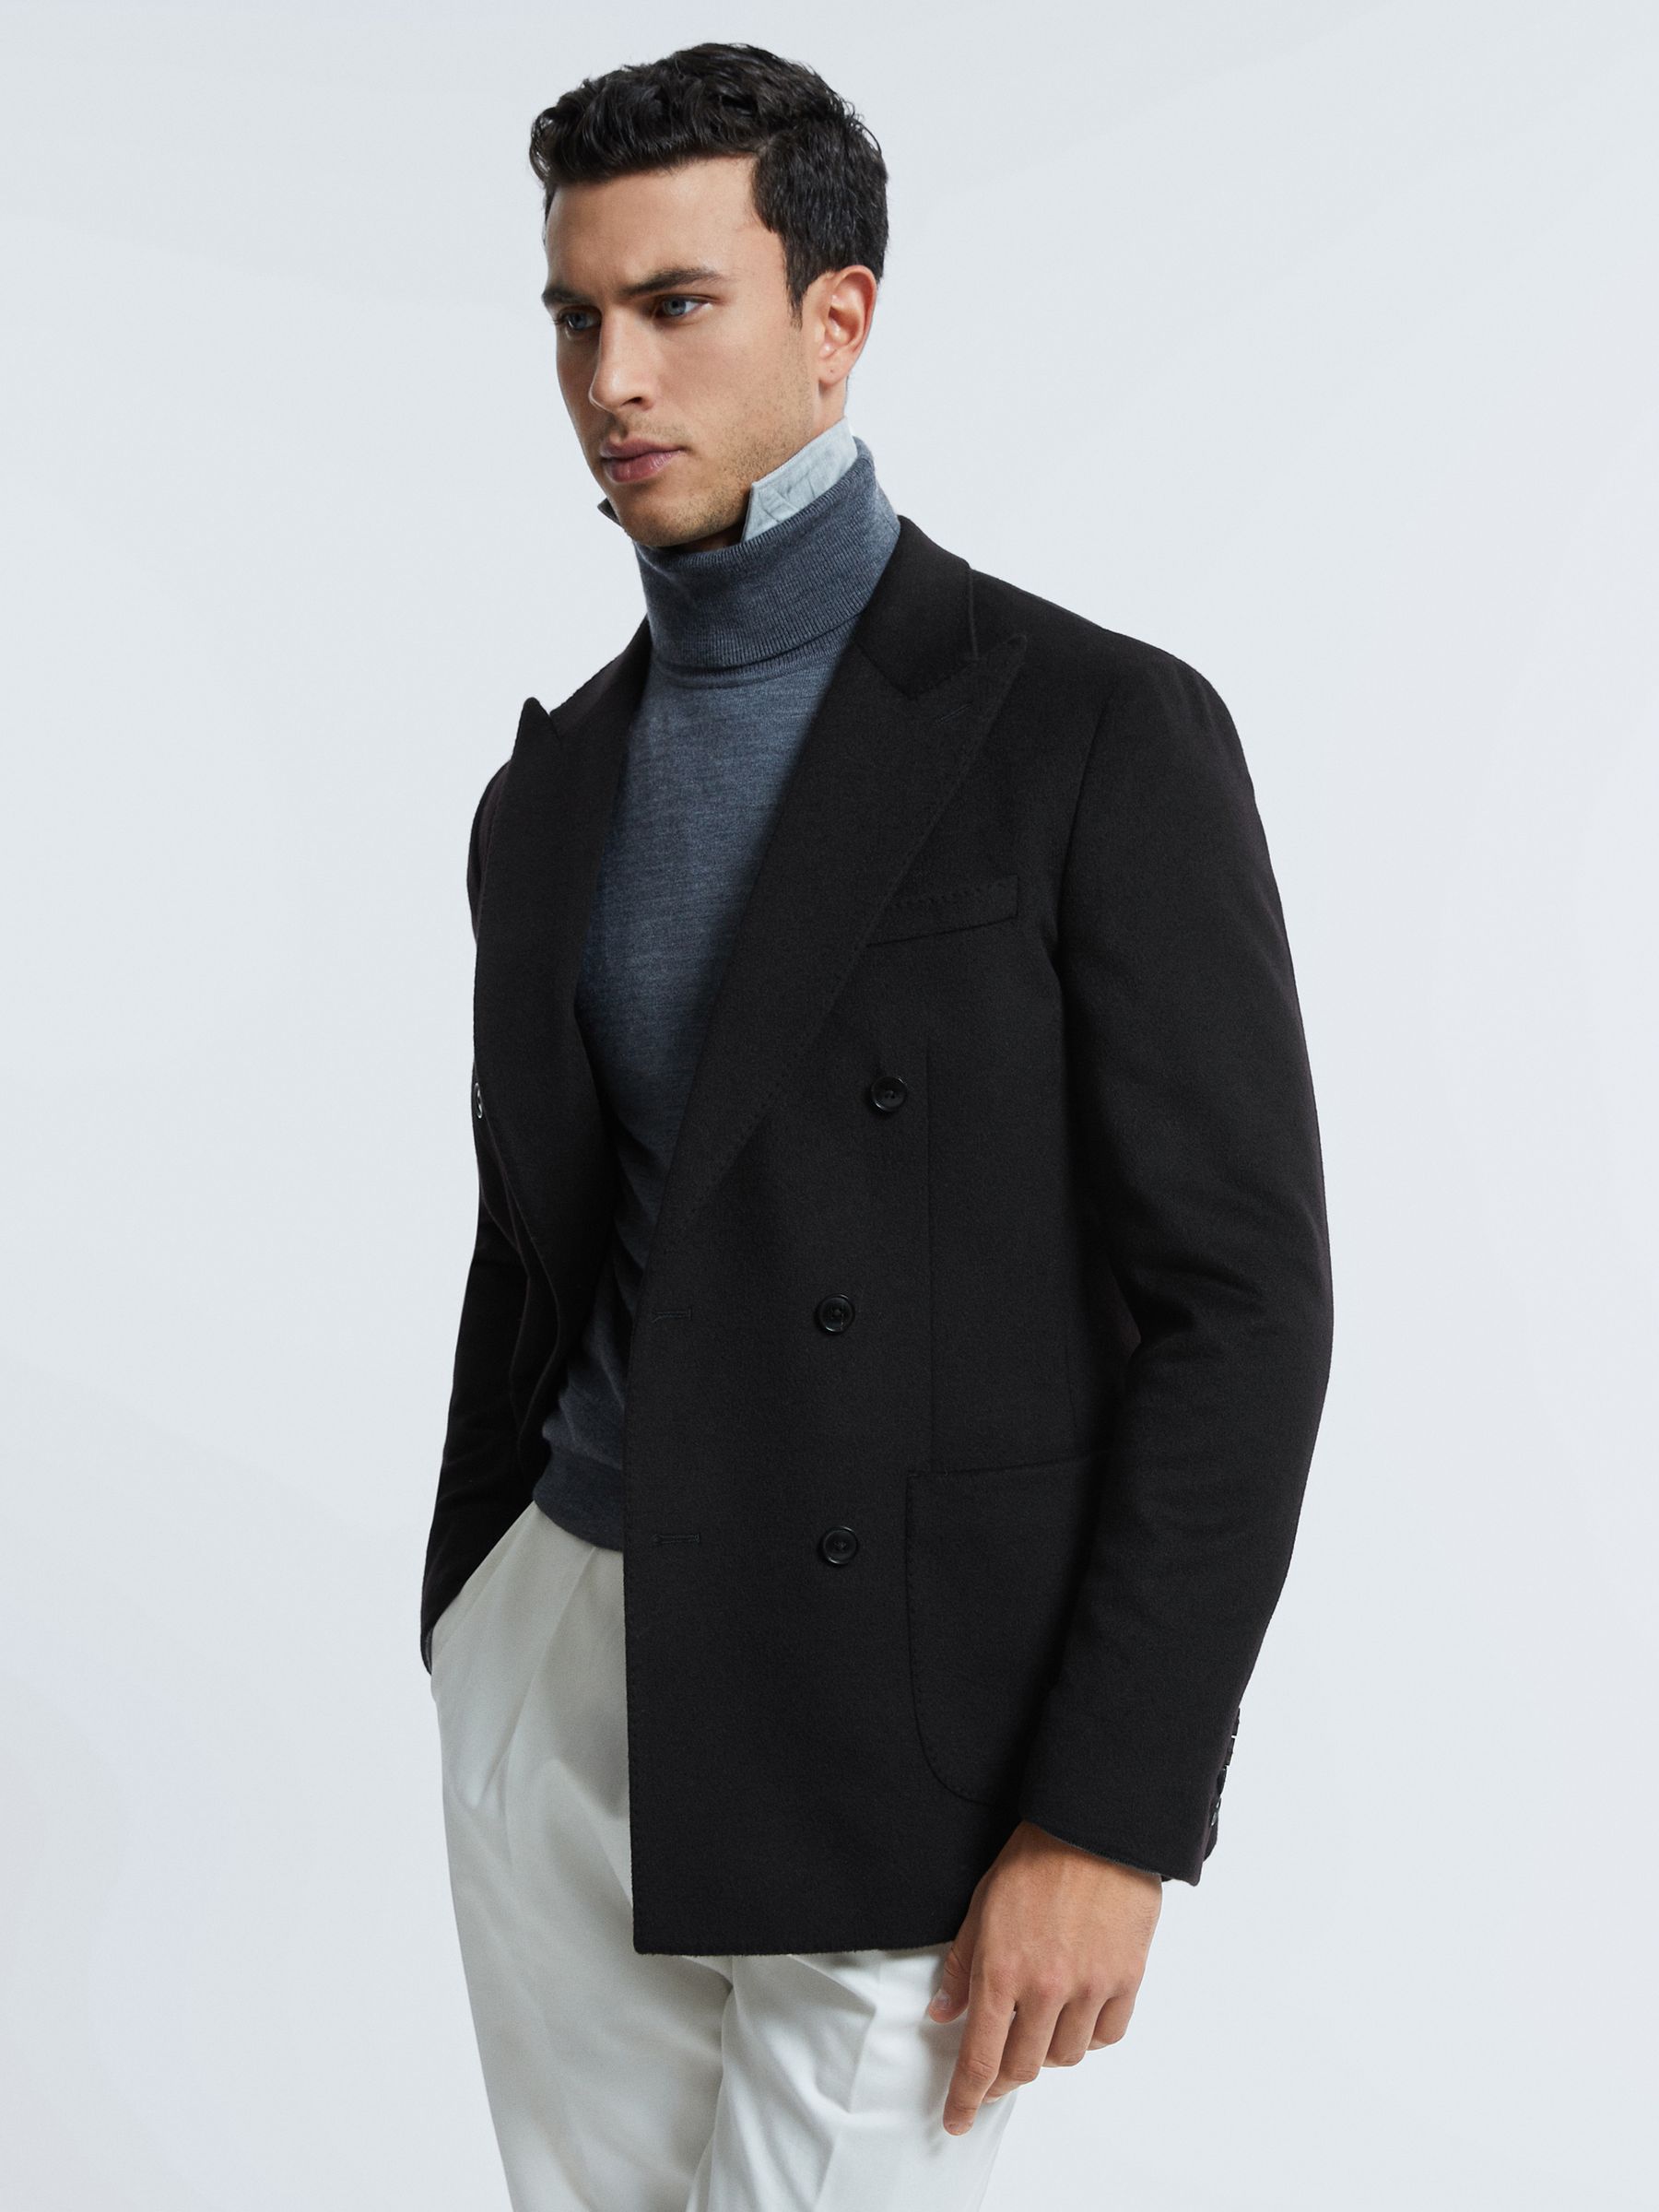 Atelier Cashmere Slim Fit Double Breasted Blazer - REISS